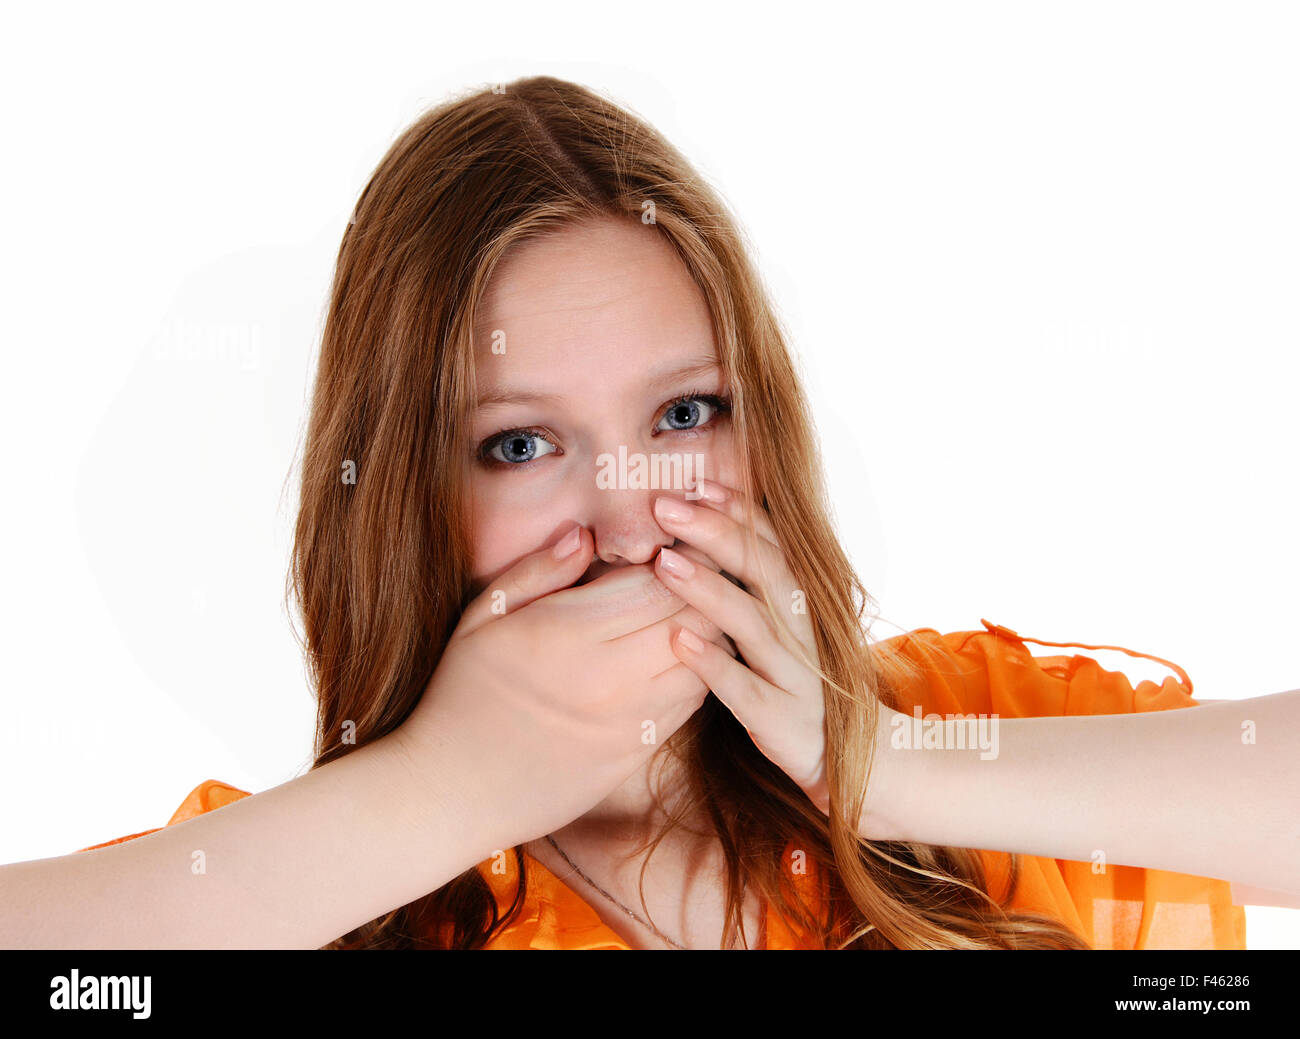 Hands on mouths. Stock Photo